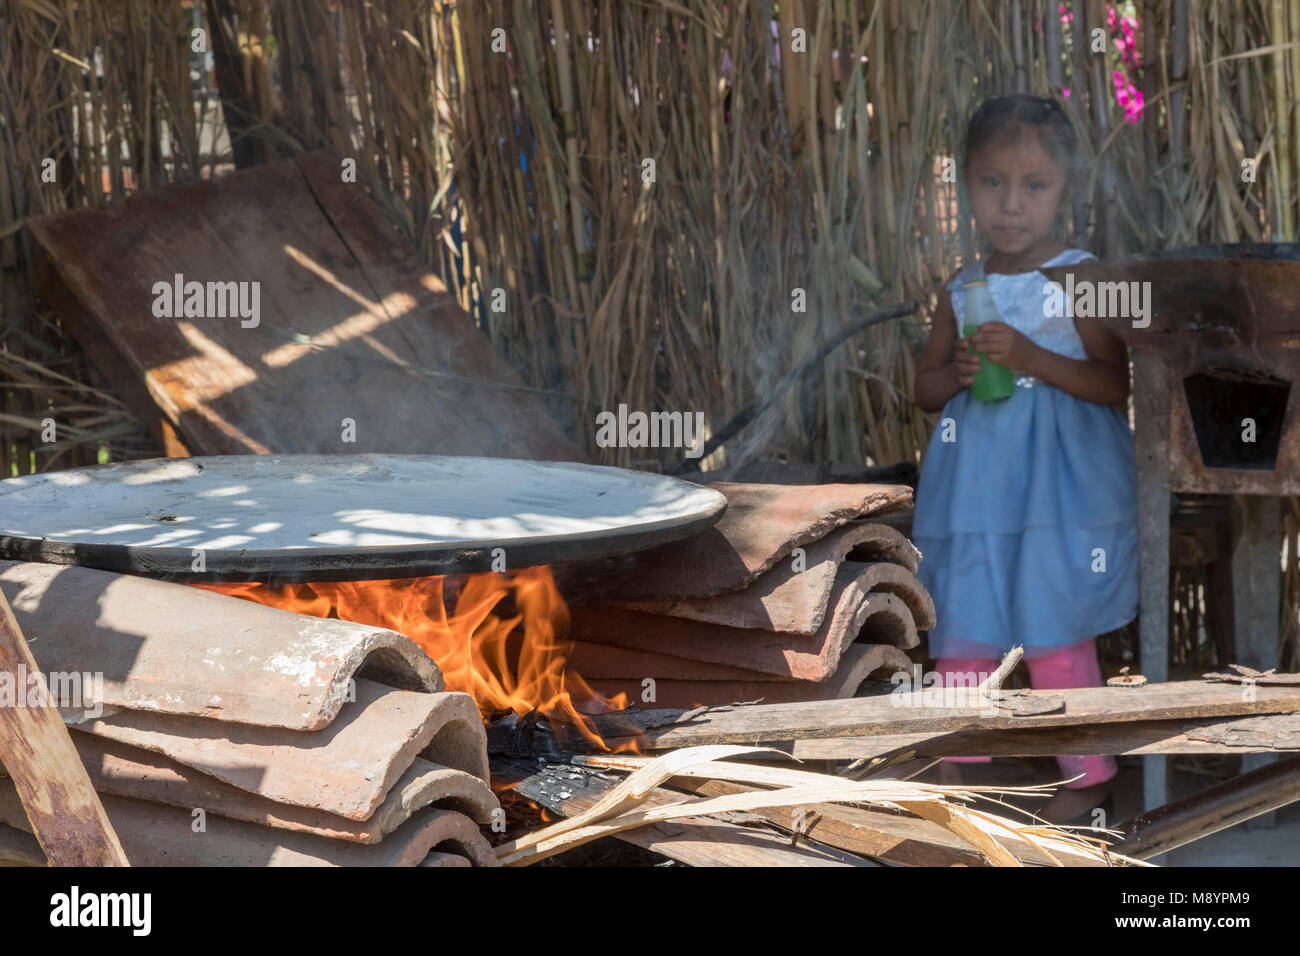 San Juan Teitipac, Oaxaca, Mexico - A girl watches a comal heating on an open fire during the Linguistic and Heritage Fair in a small Zapotec town. Th Stock Photo